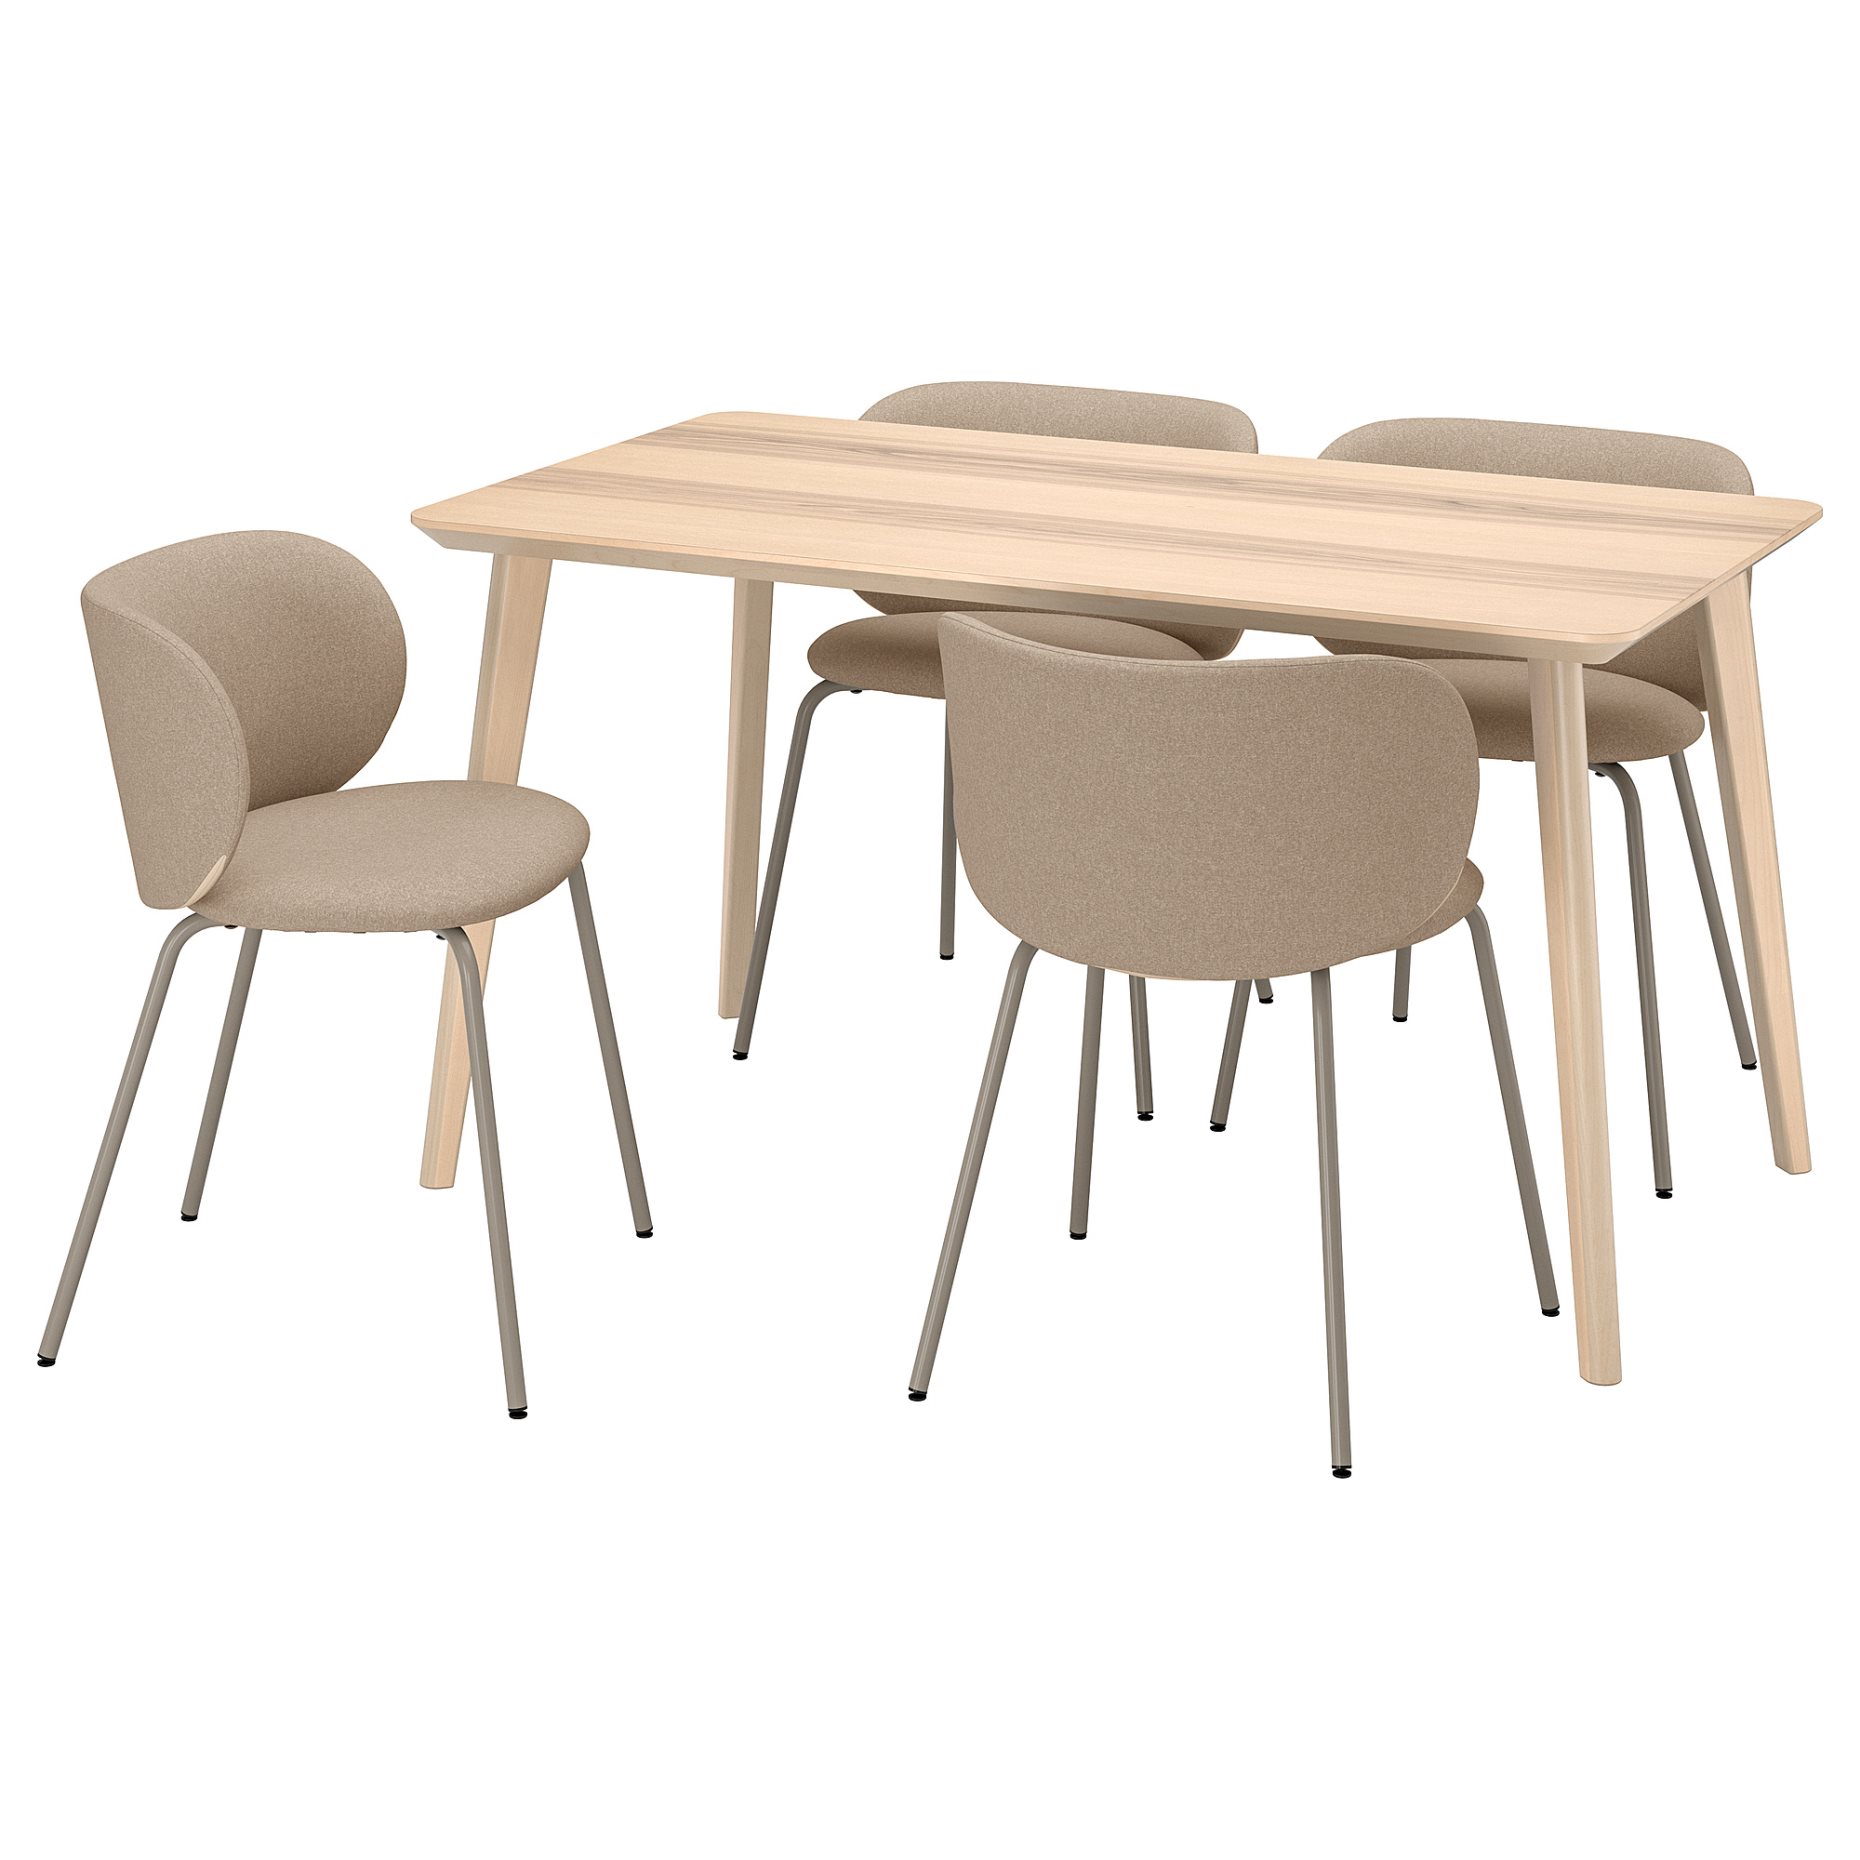 LISABO/KRYLBO, table and 4 chairs, 140 cm, 095.355.40